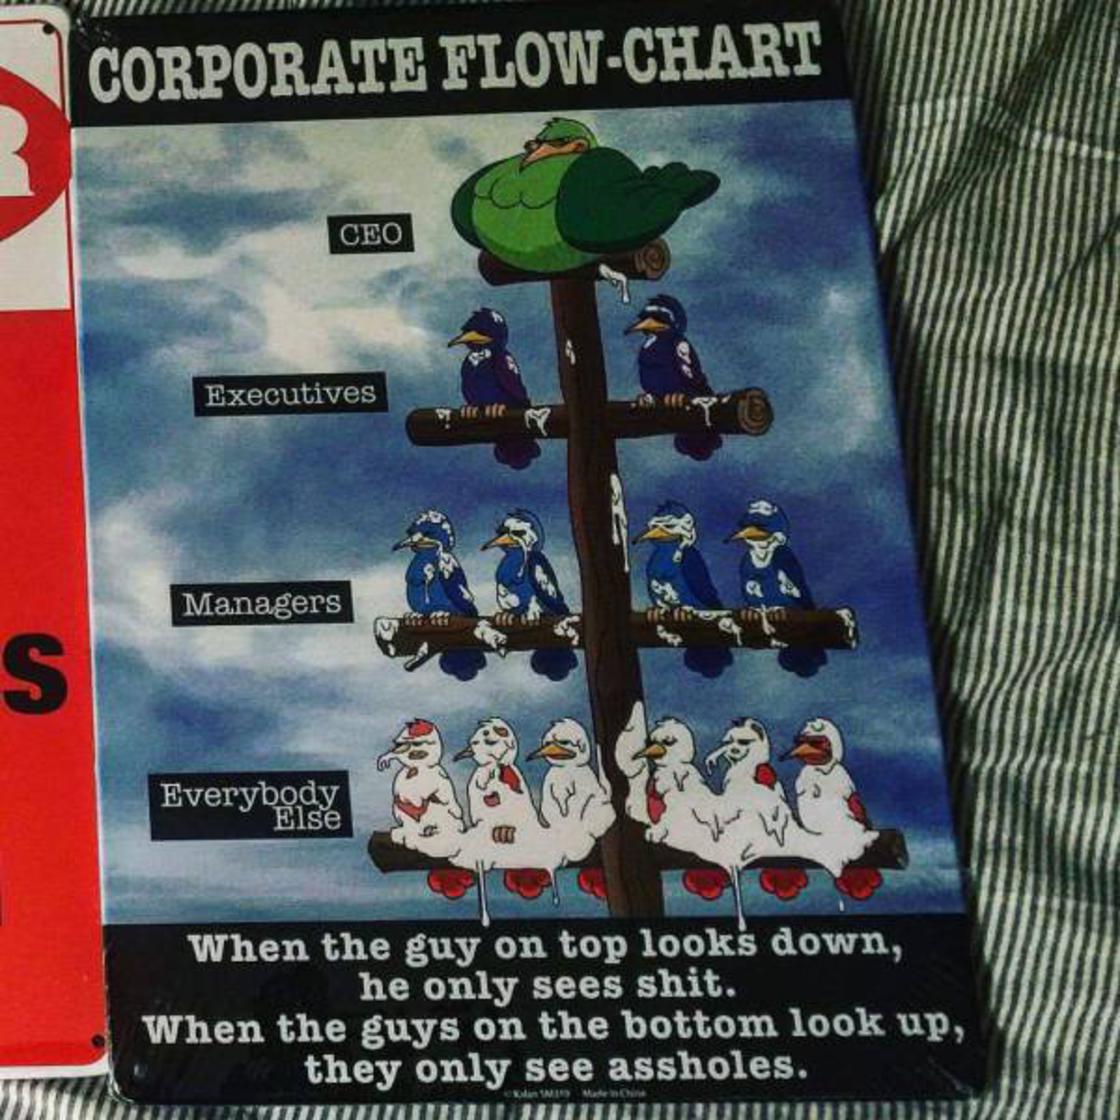 management bird shit - Corporate FlowChart Ceo Executives Managers Everybodde Wt When the guy on top looks down, he only sees shit. When the guys on the bottom look up, they only see assholes. dan Mateo numNMITINDO